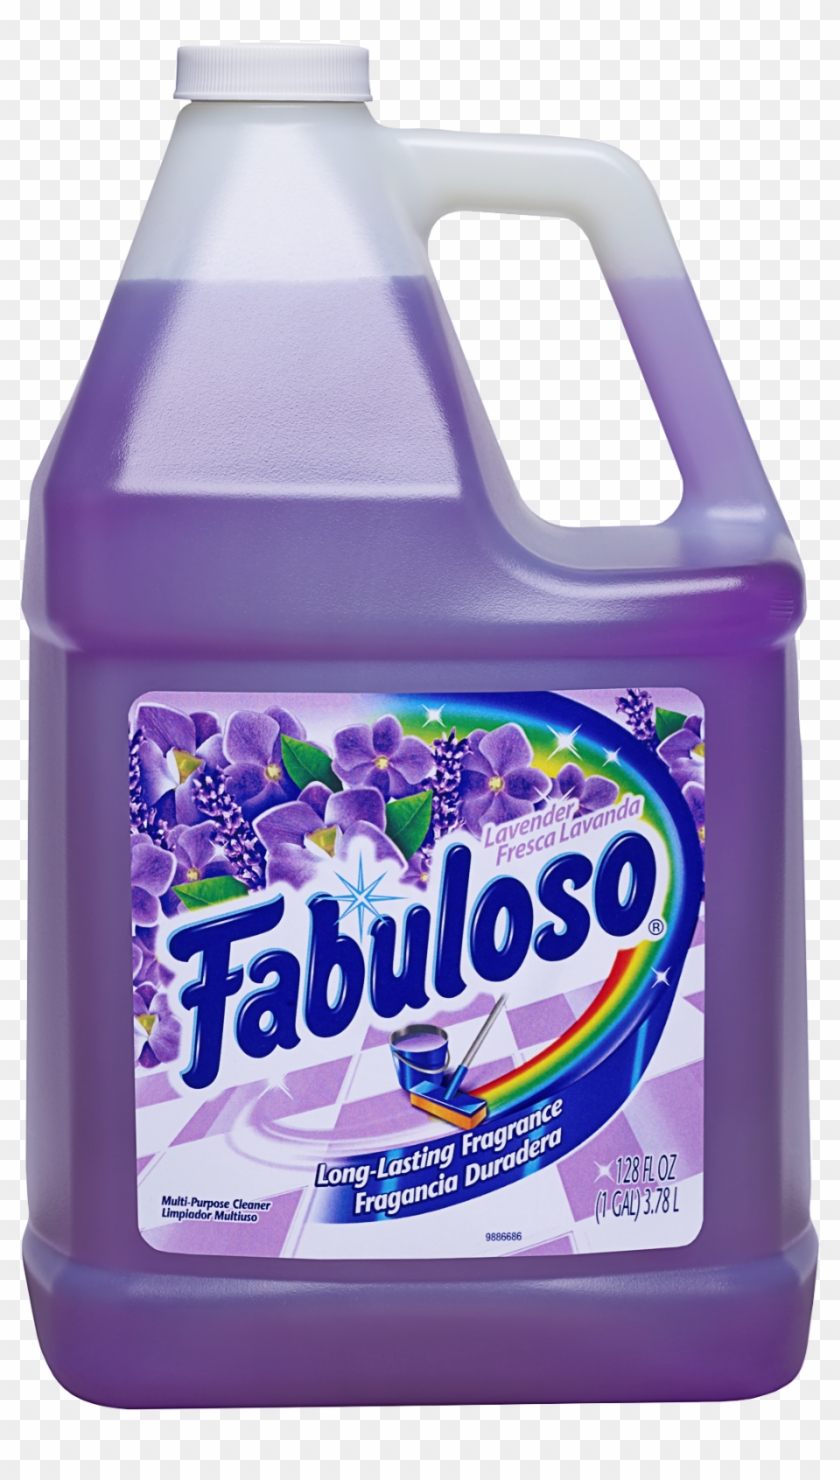 Norton Secured - Fabuloso Cleaner Clipart #3326067